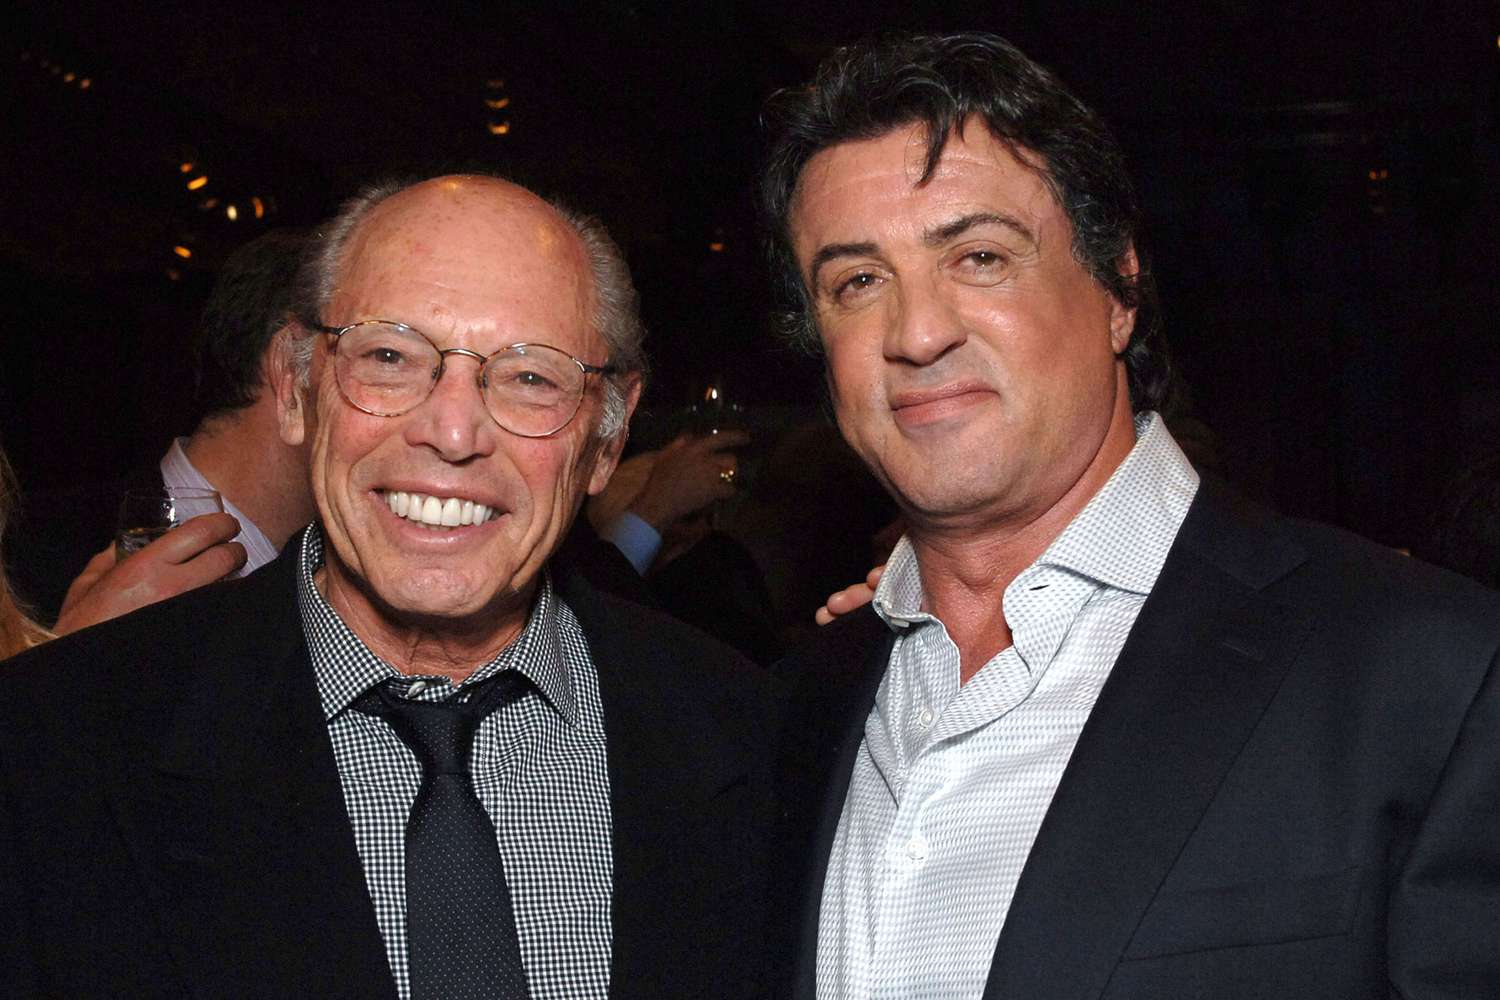 Producer Irwin Winkler and Sylvester Stallone during "Rocky Balboa" World Premiere - Arrivals at Grauman's Chinese Theatre in Hollywood, California, United States.